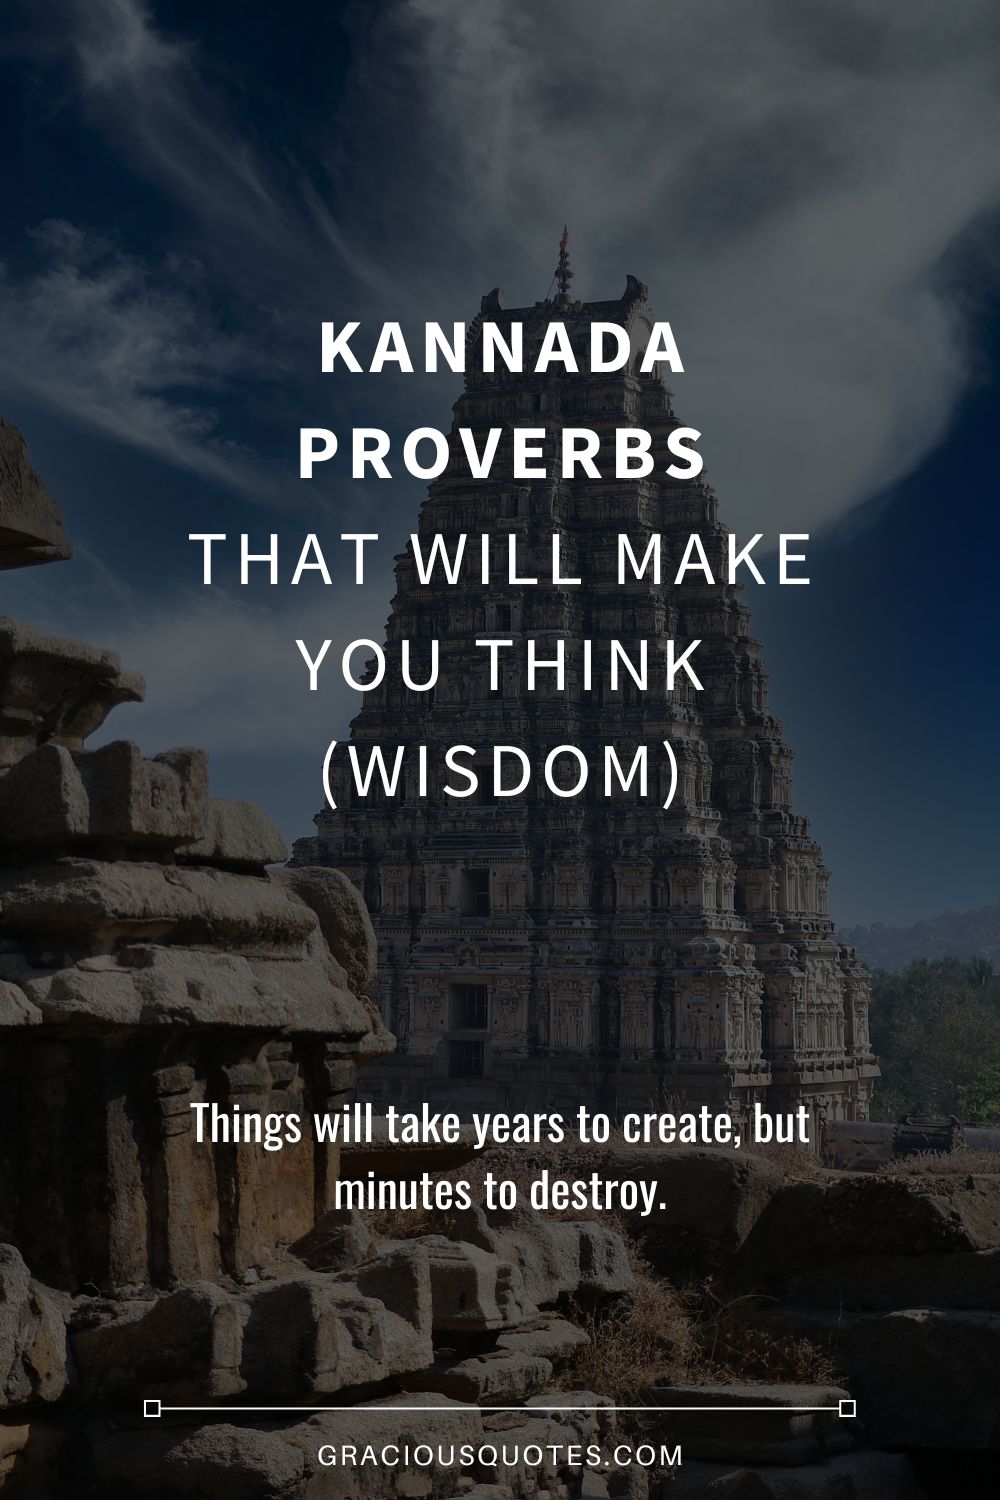 Kannada Proverbs that Will Make You Think (WISDOM) - Gracious Quotes